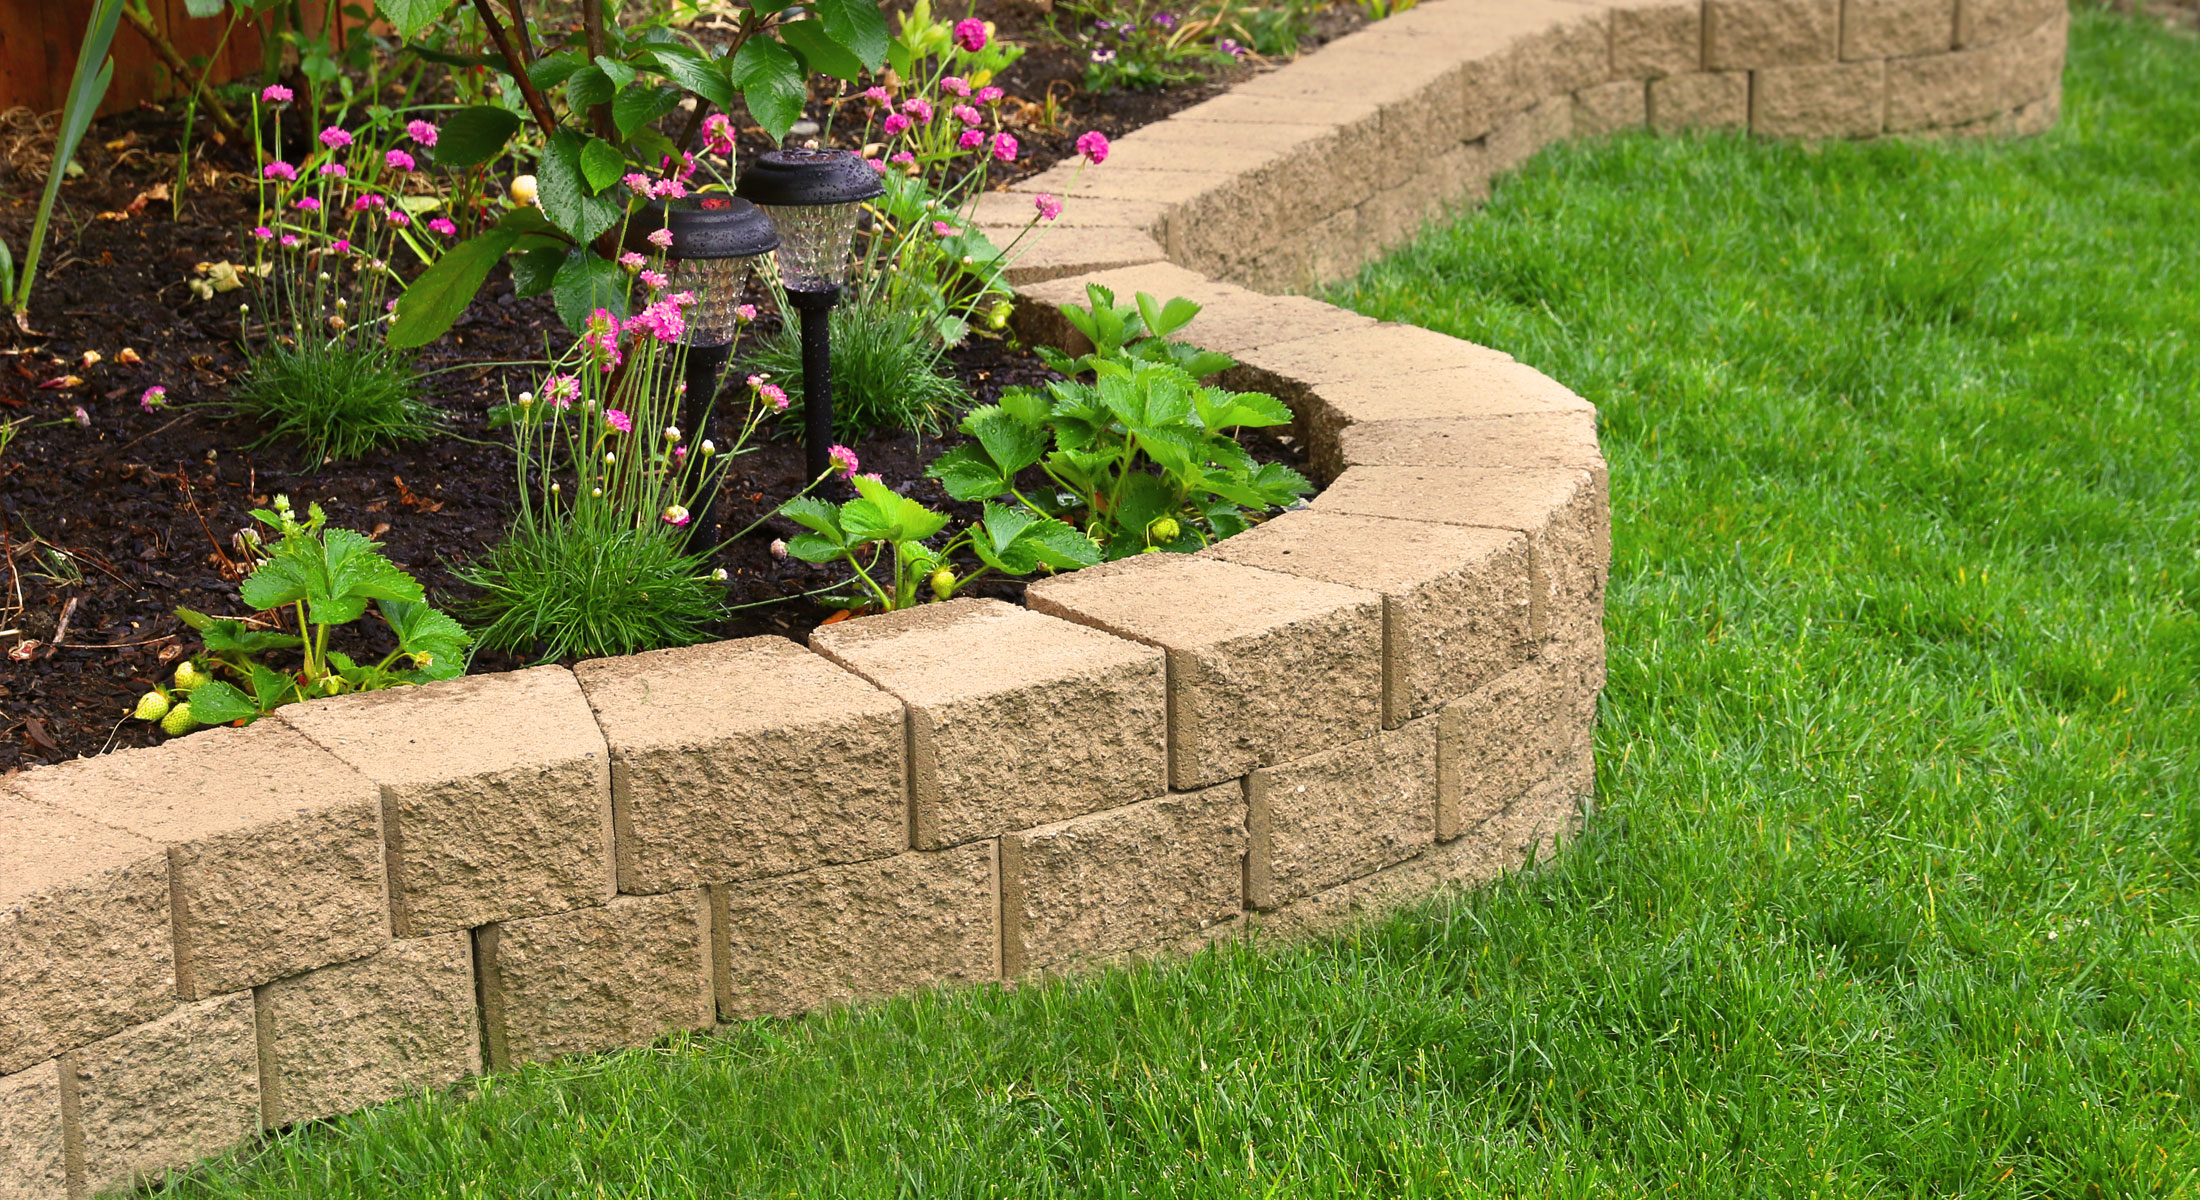  landscaping retaining wall ideas